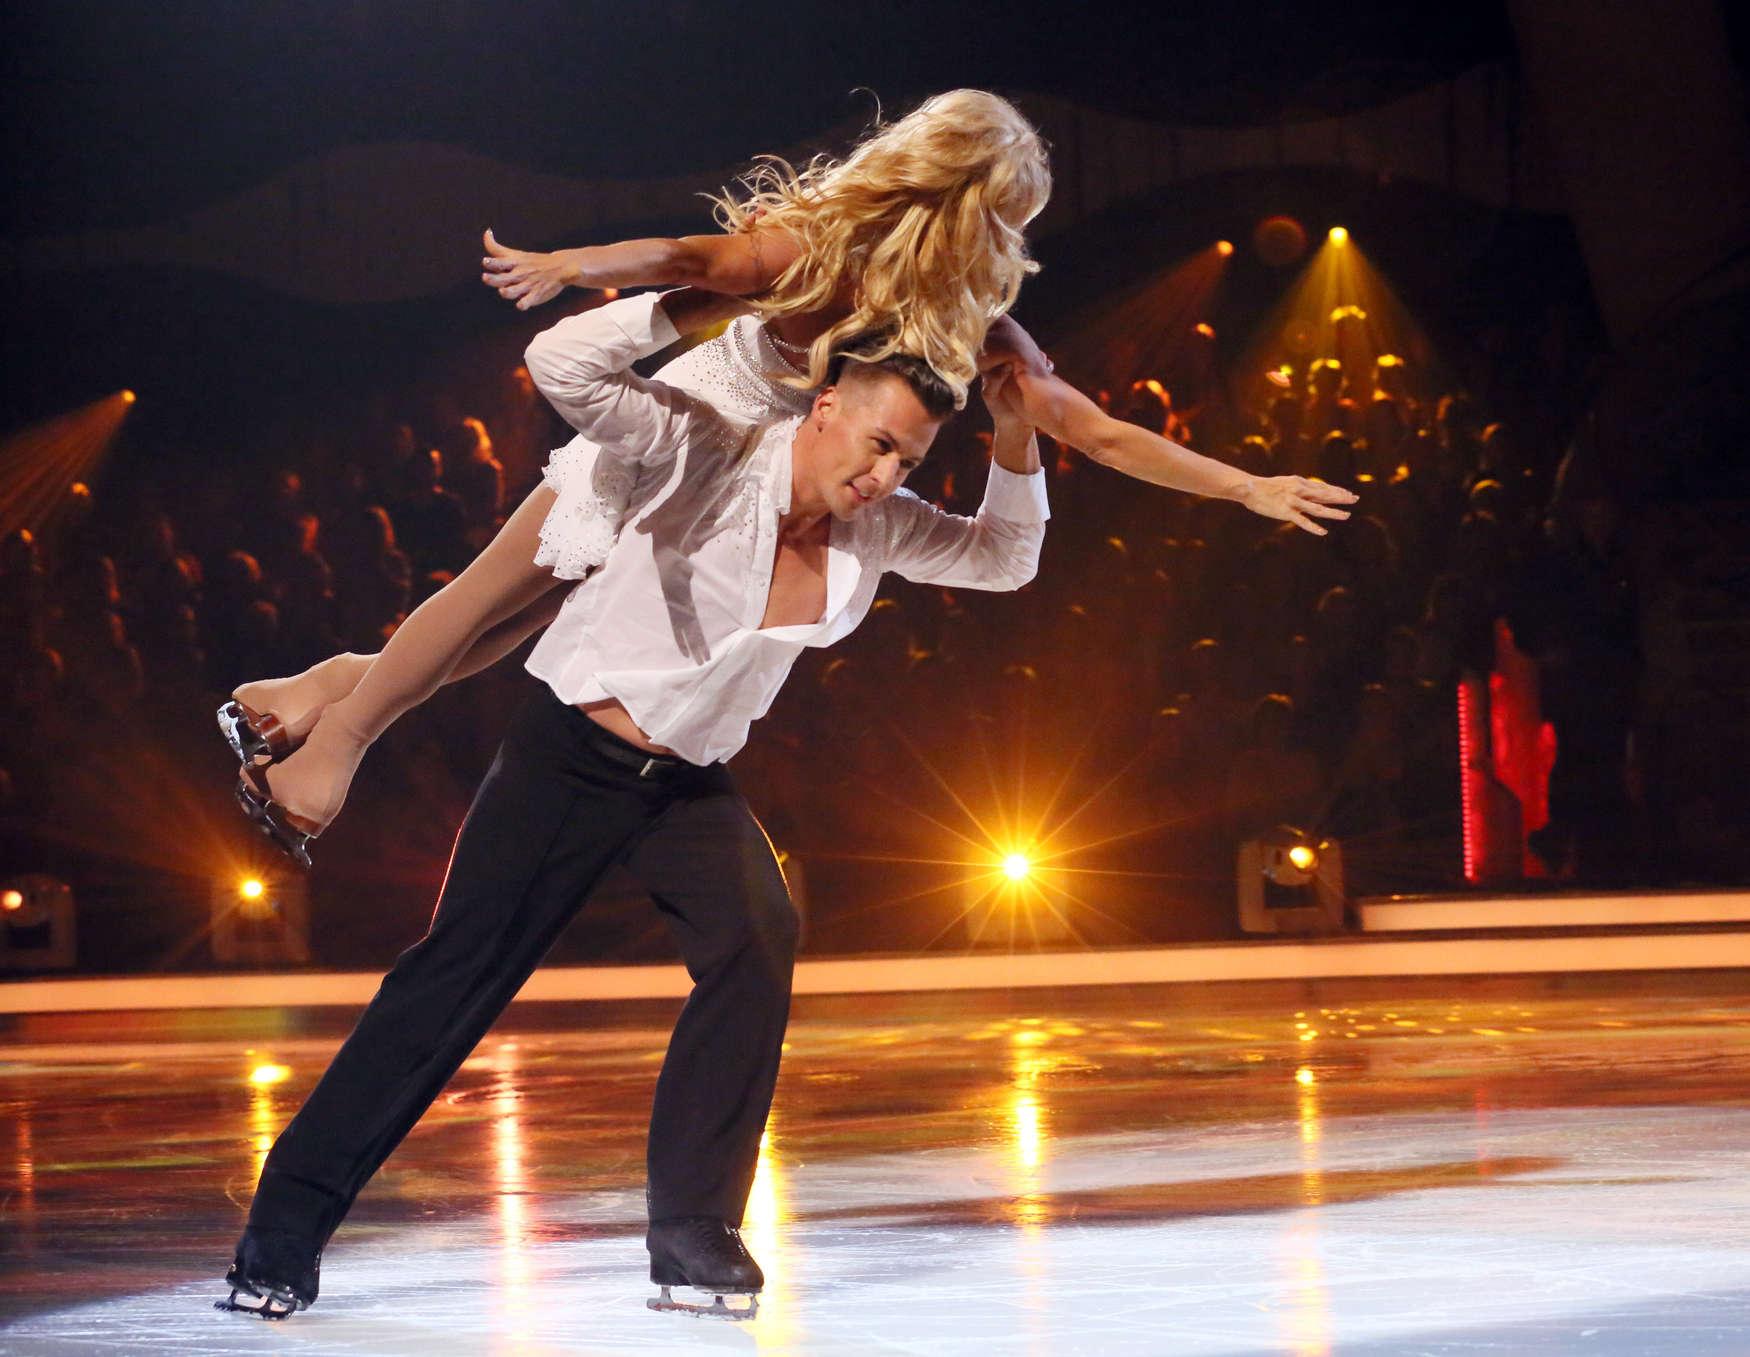 Dancing On Ice Wallpaper High Quality